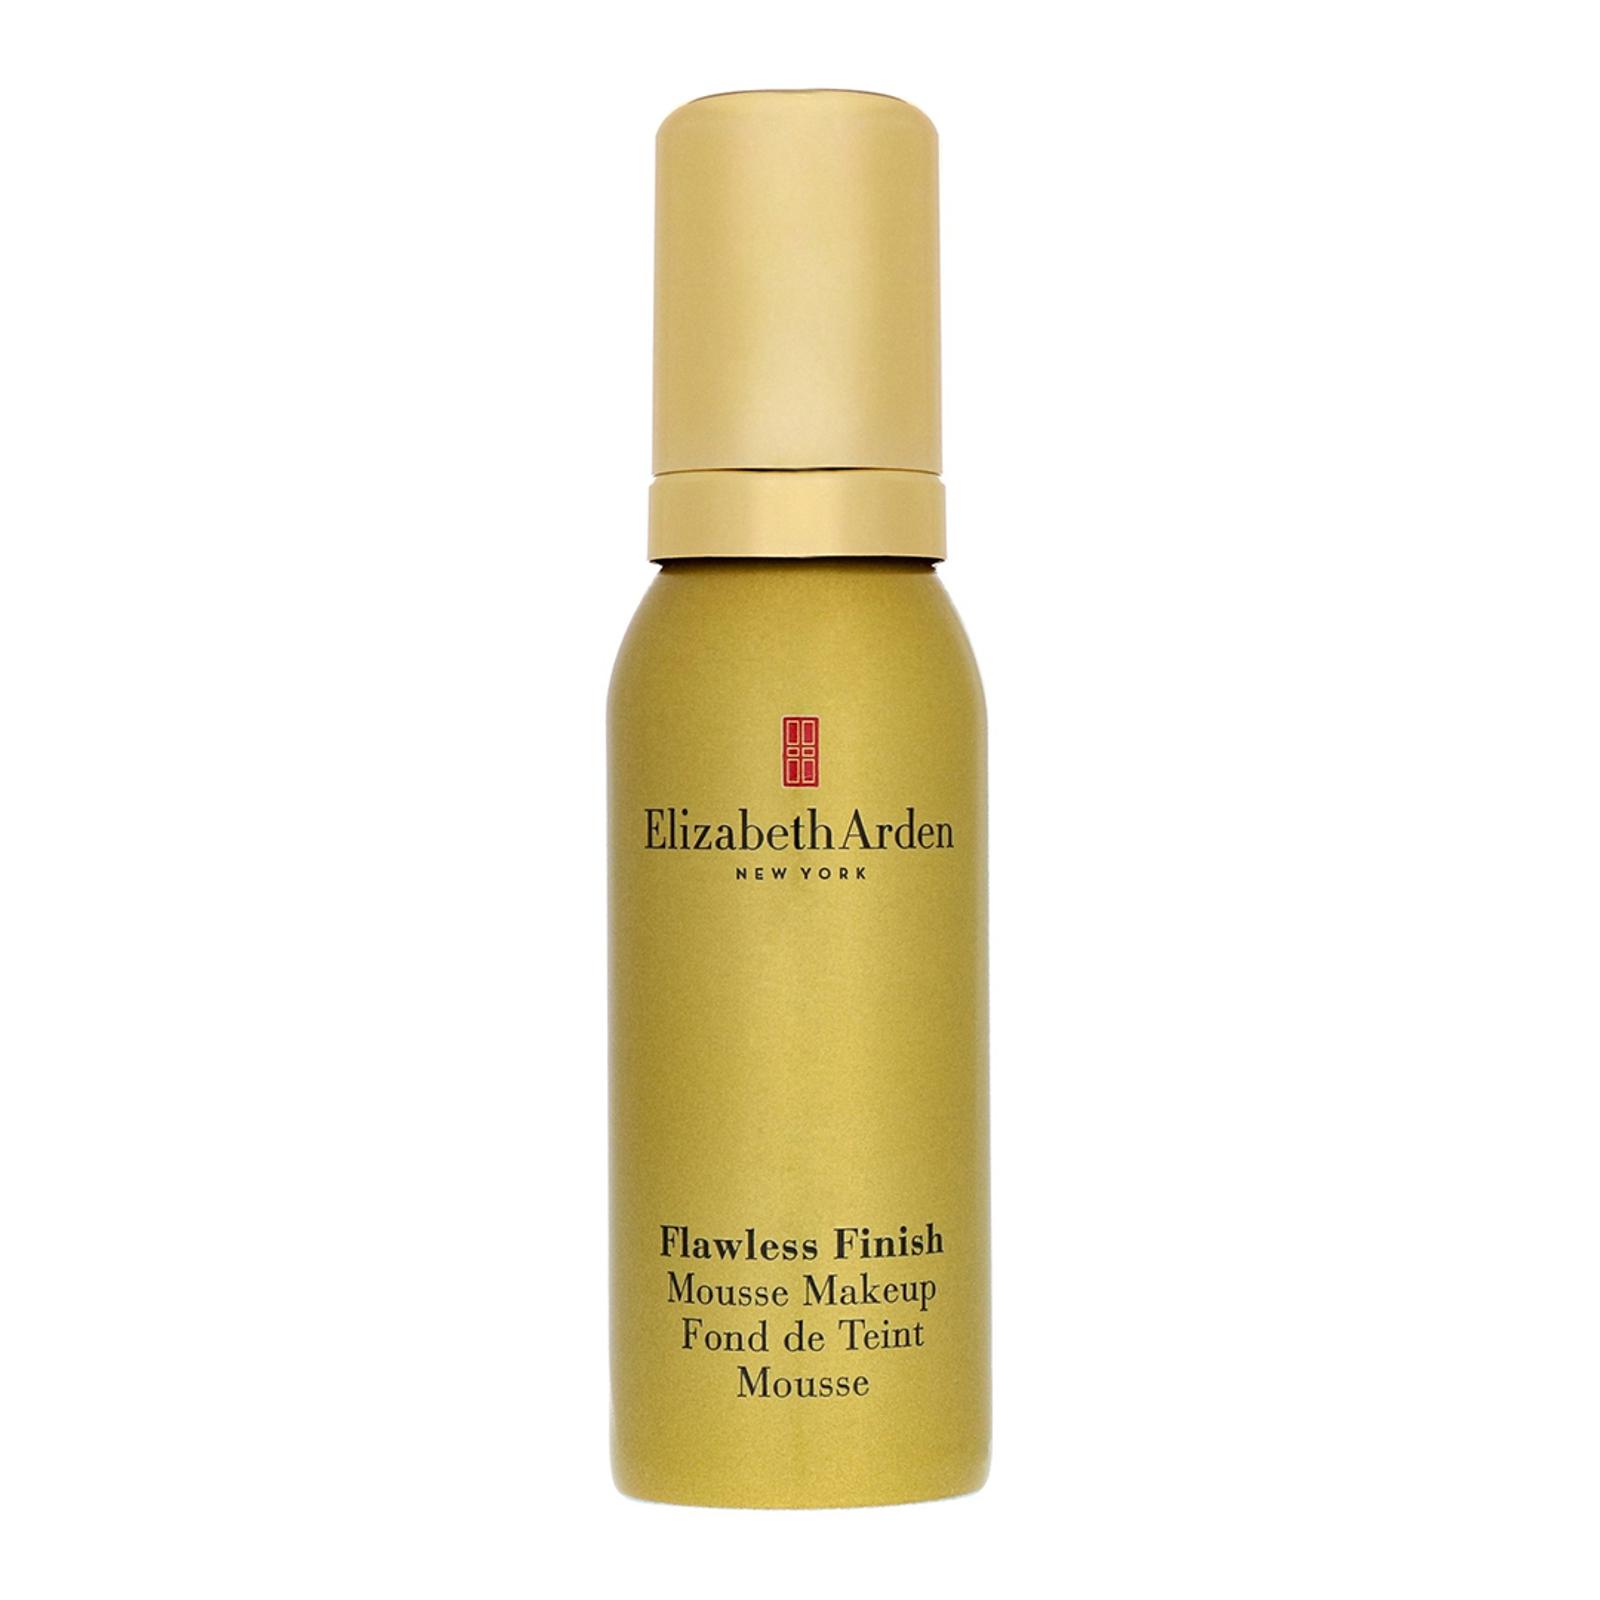 Flawless Finish Mousse 50ml - BrandAlley